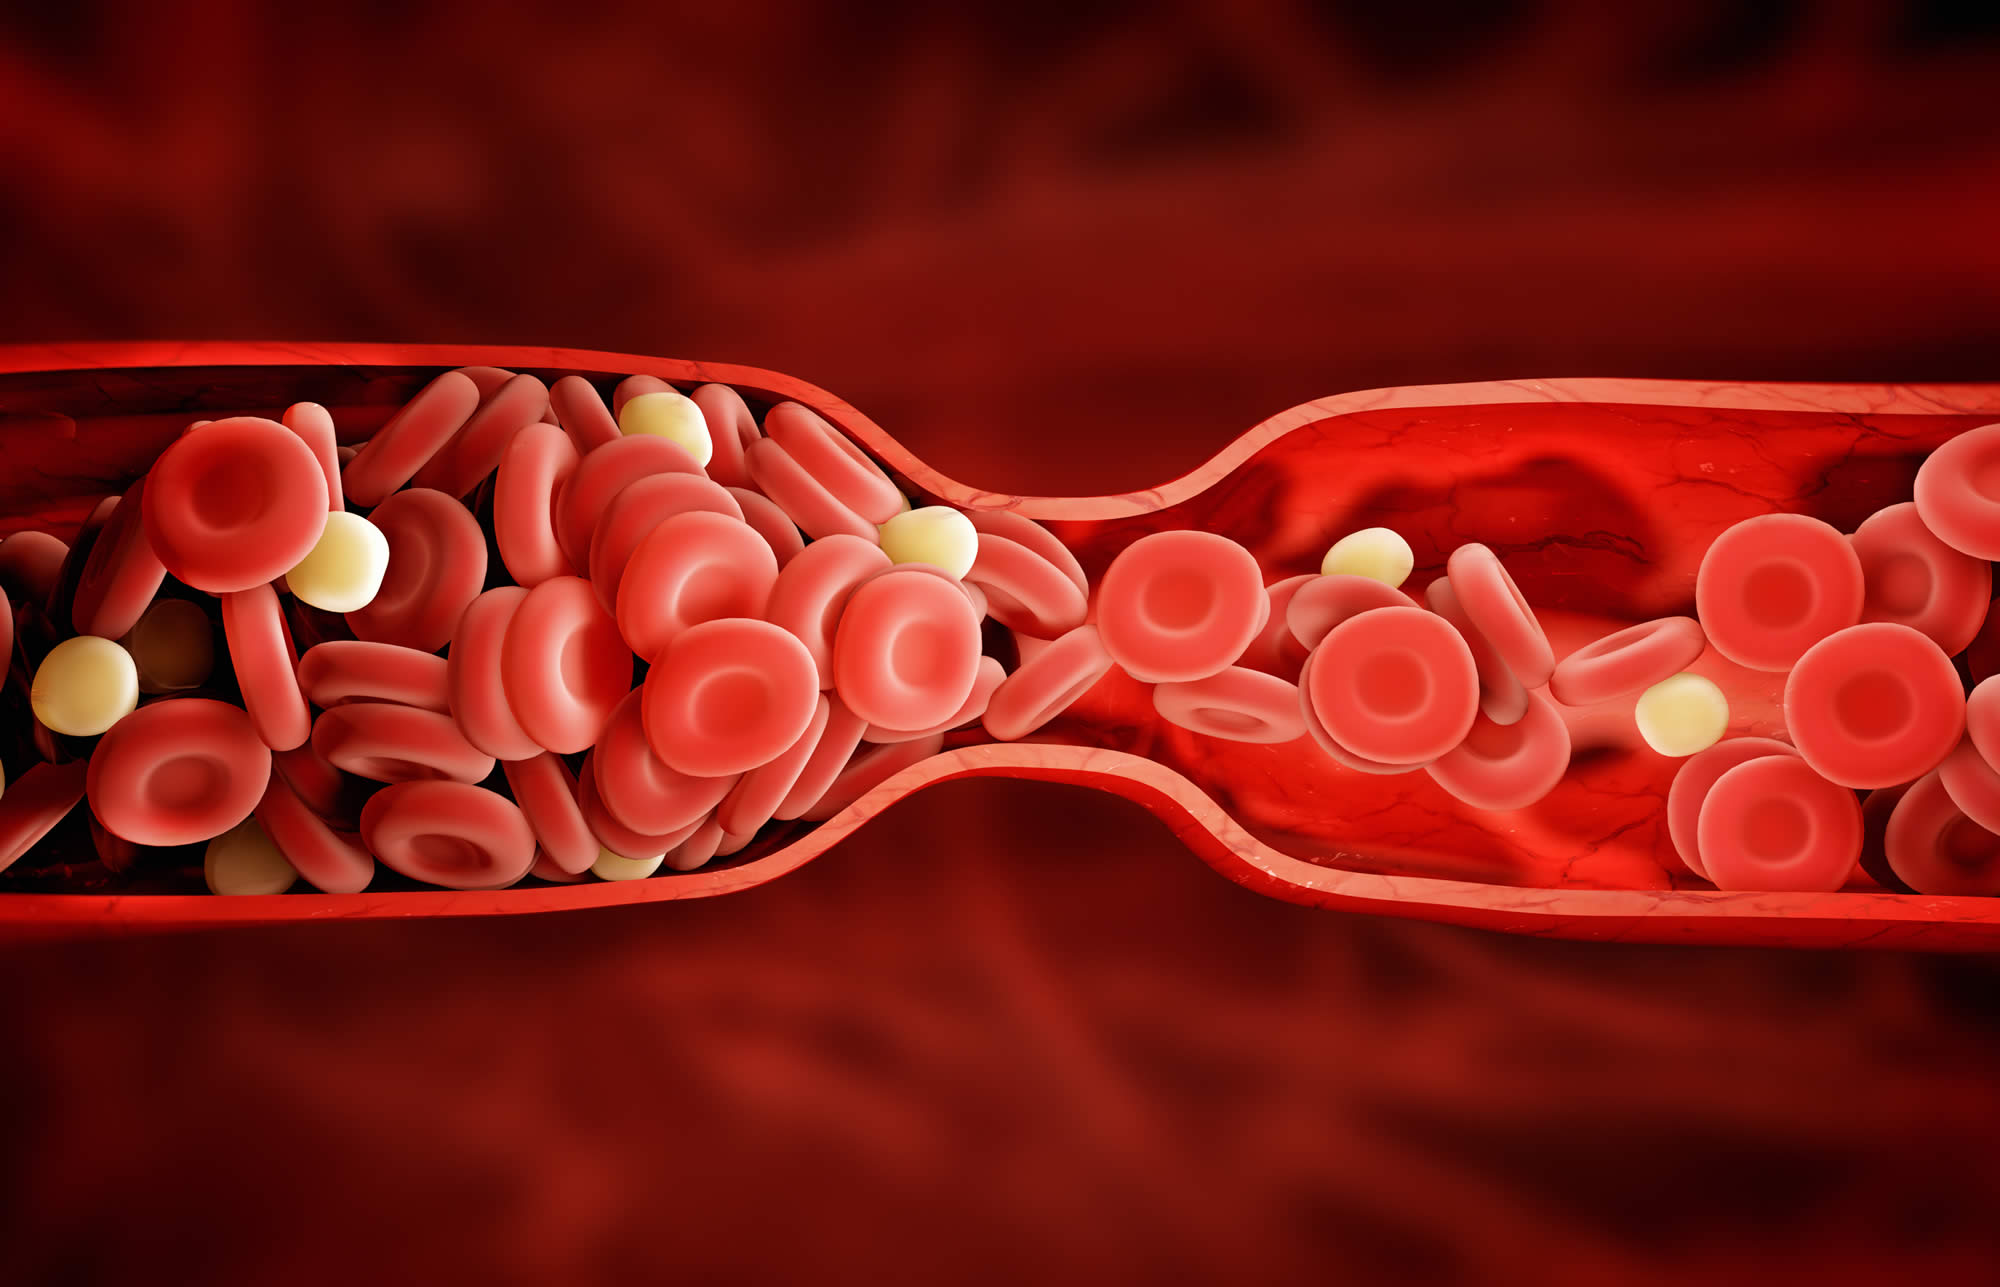 Food or Drinks That Raise the Risk of Blood Clots